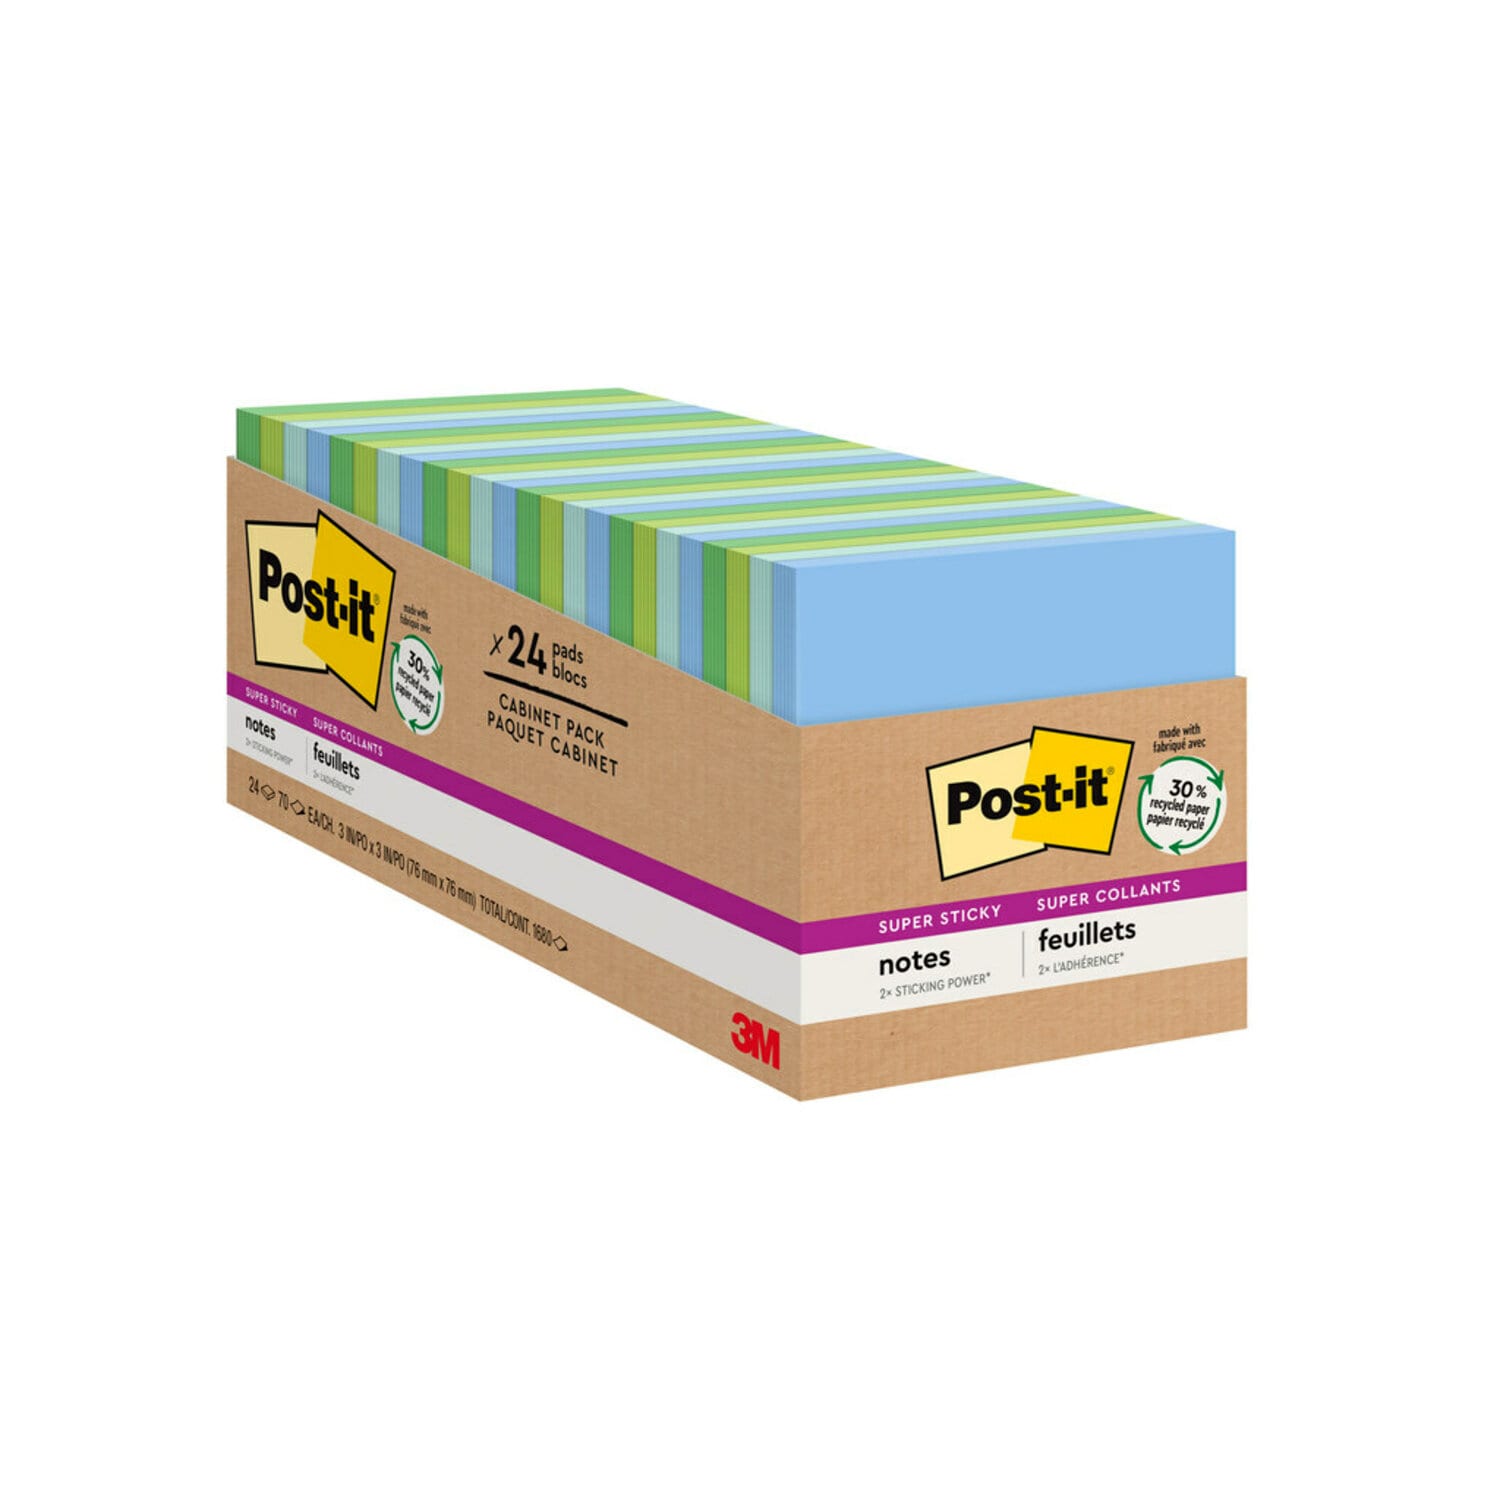 7100063950 - Post-it Super Sticky Recycled Notes 654-24SST-CP, 3 in x 3 in (76 mm x 76 mm), Oasis Collection